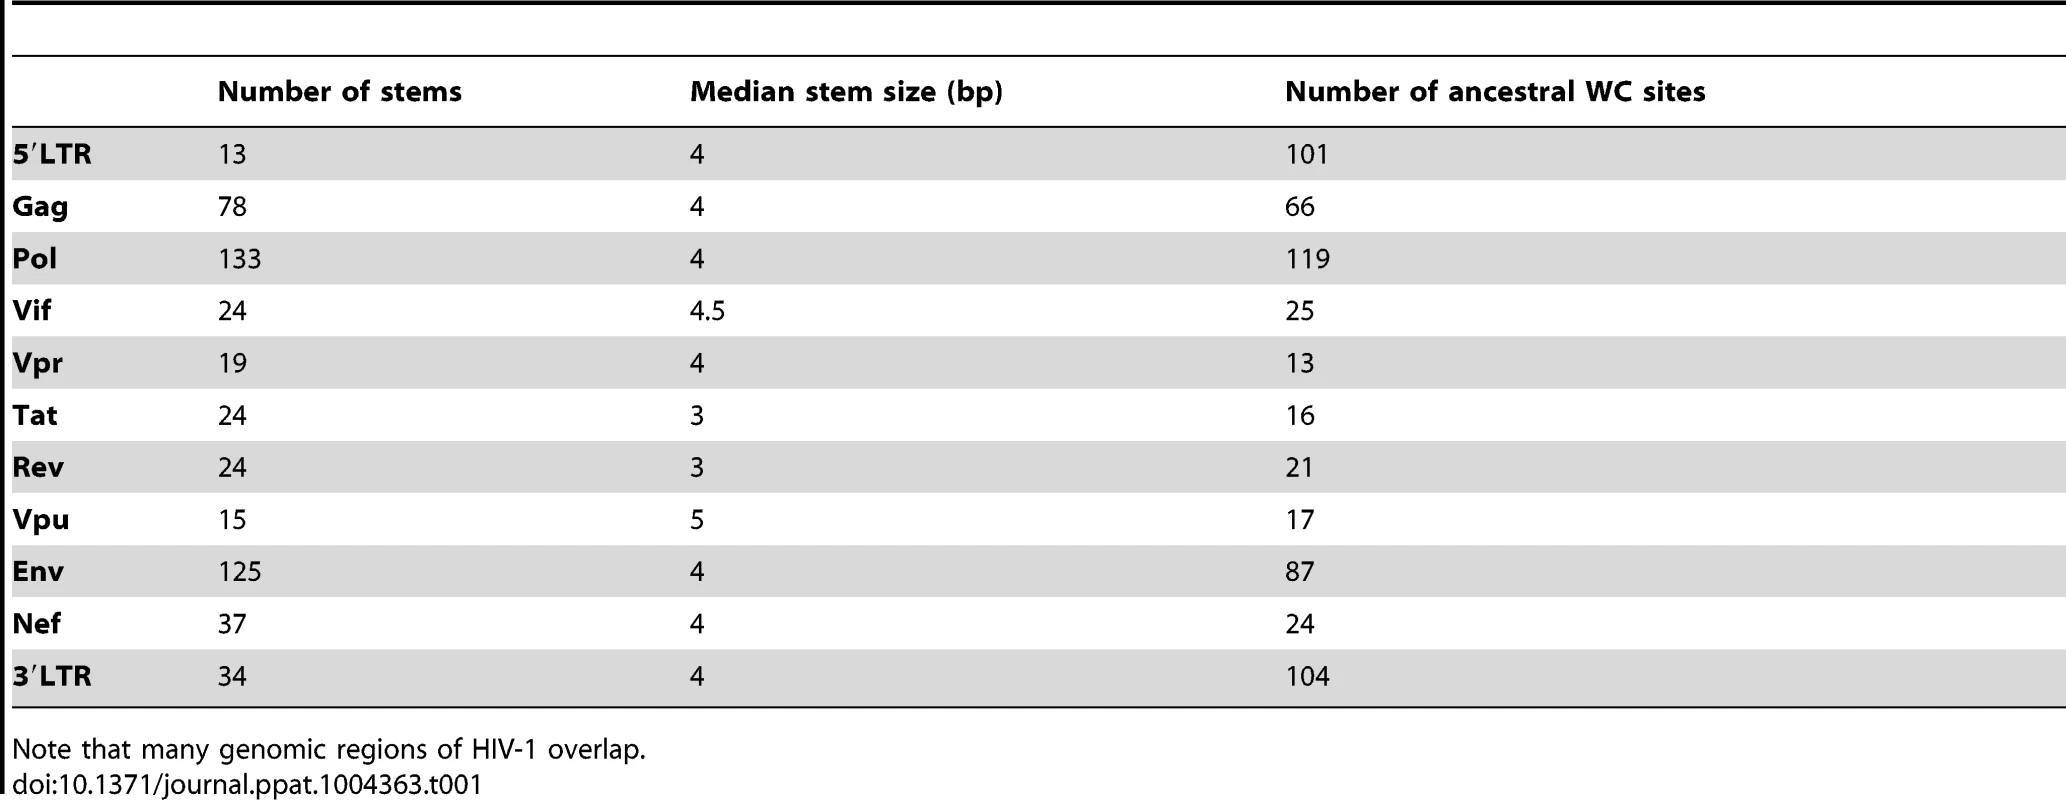 Number of stems, median stem size, and number of ancestral WC sites in different regions of the HIV-1 genome.